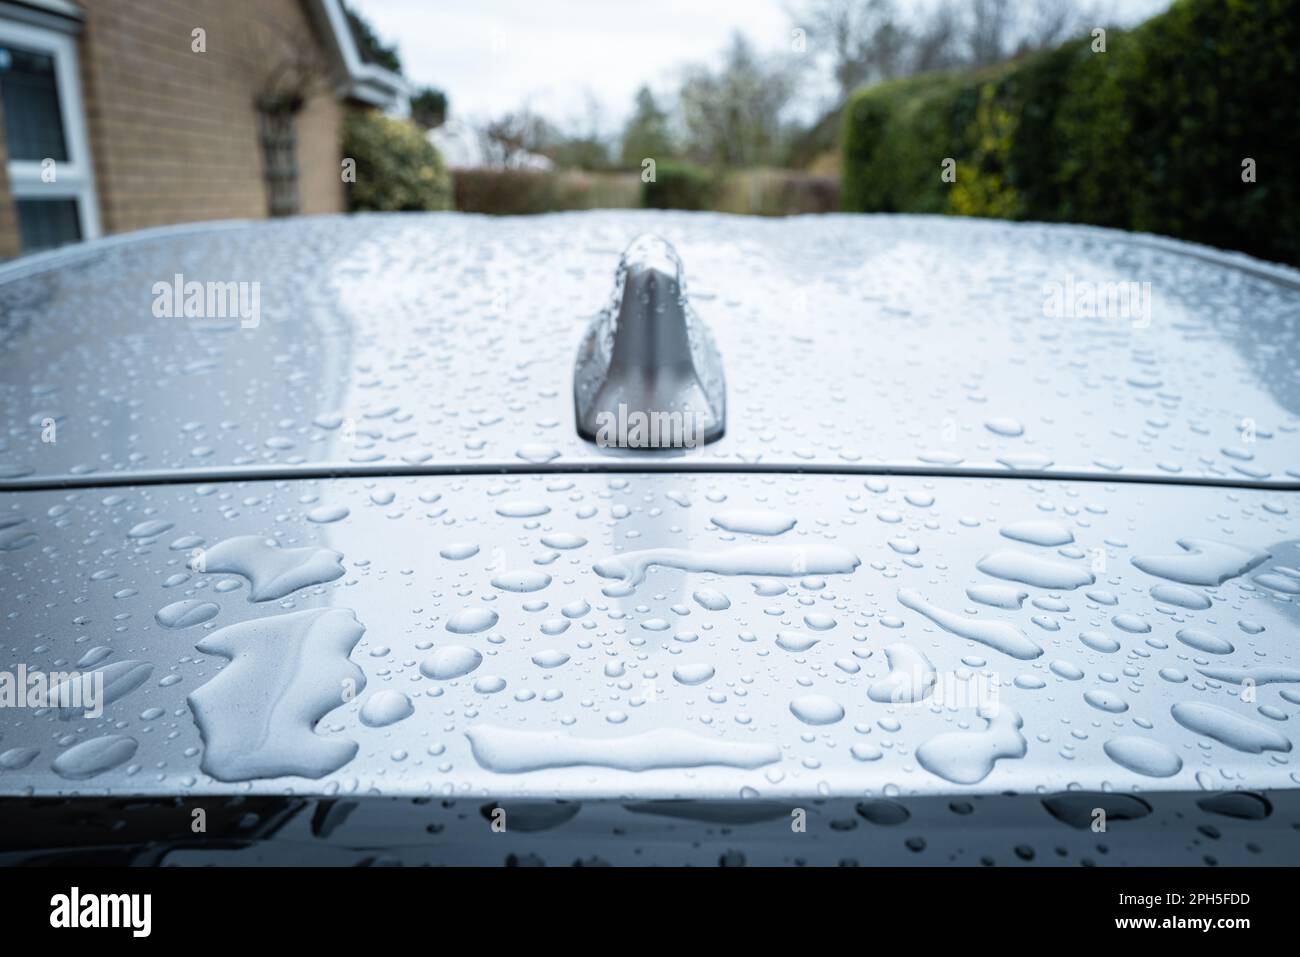 Shallow focus of large water droplets seen on the rear roof area of a hybrid car. Taken after a car wash and seen on a private driveway. Stock Photo